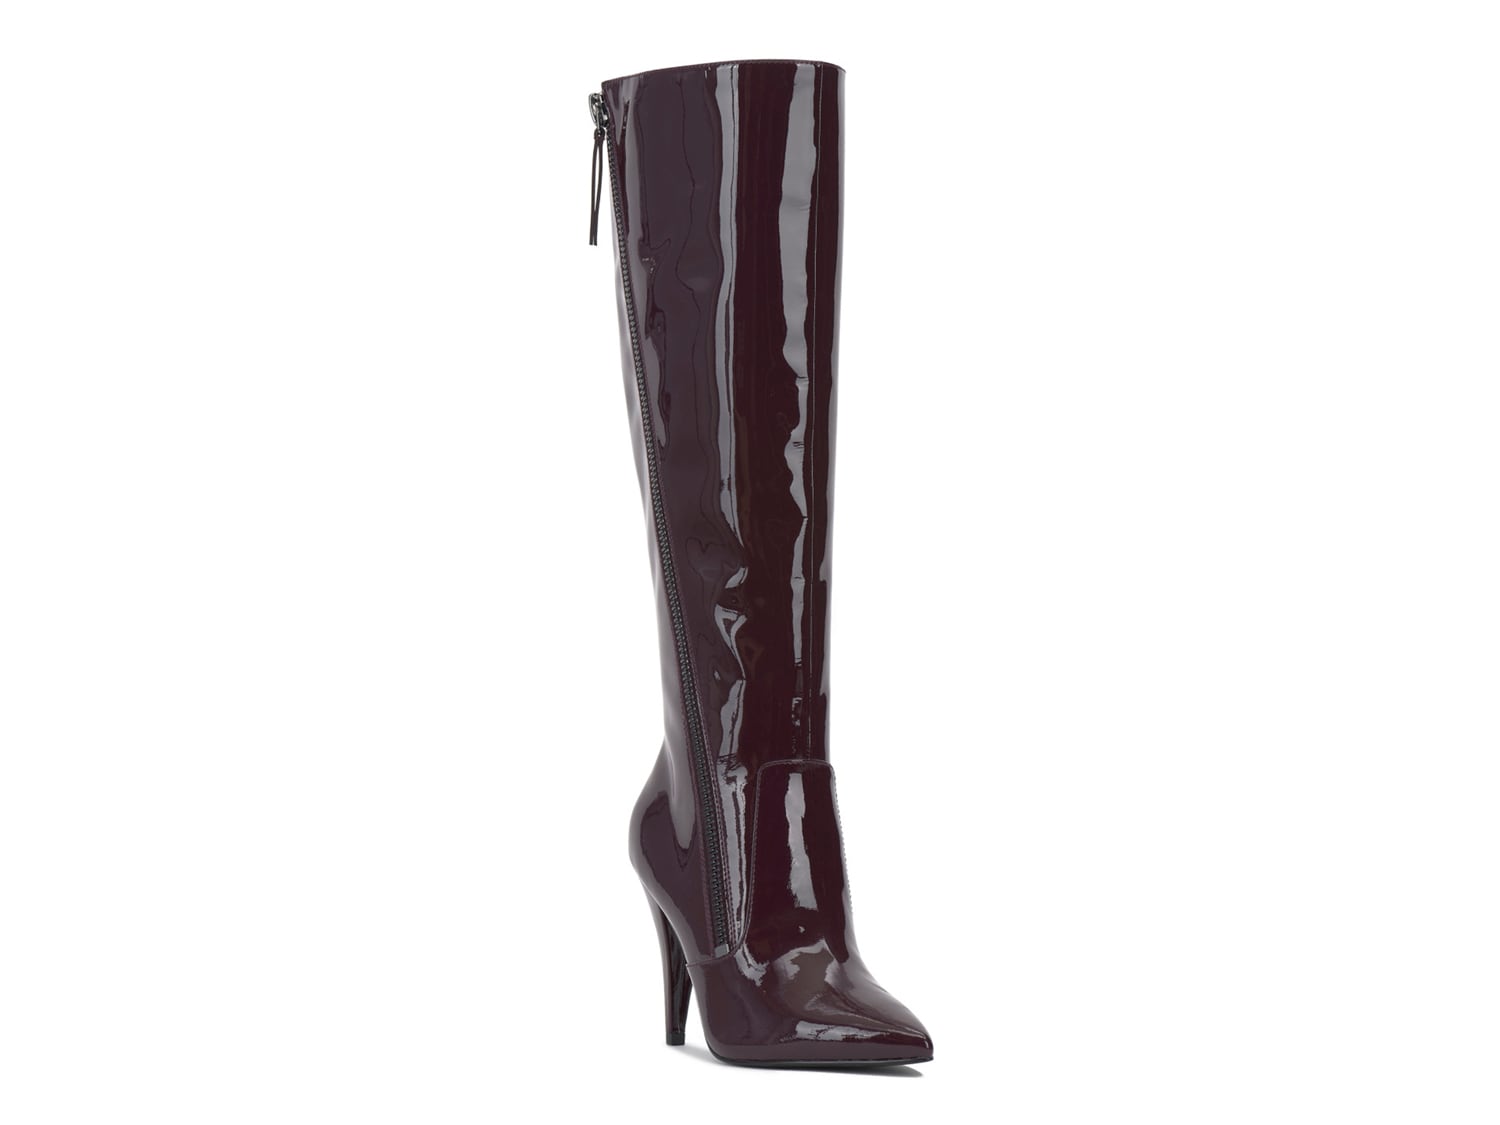 Vince Camuto Alessa Wide Calf Boot - Free Shipping | DSW